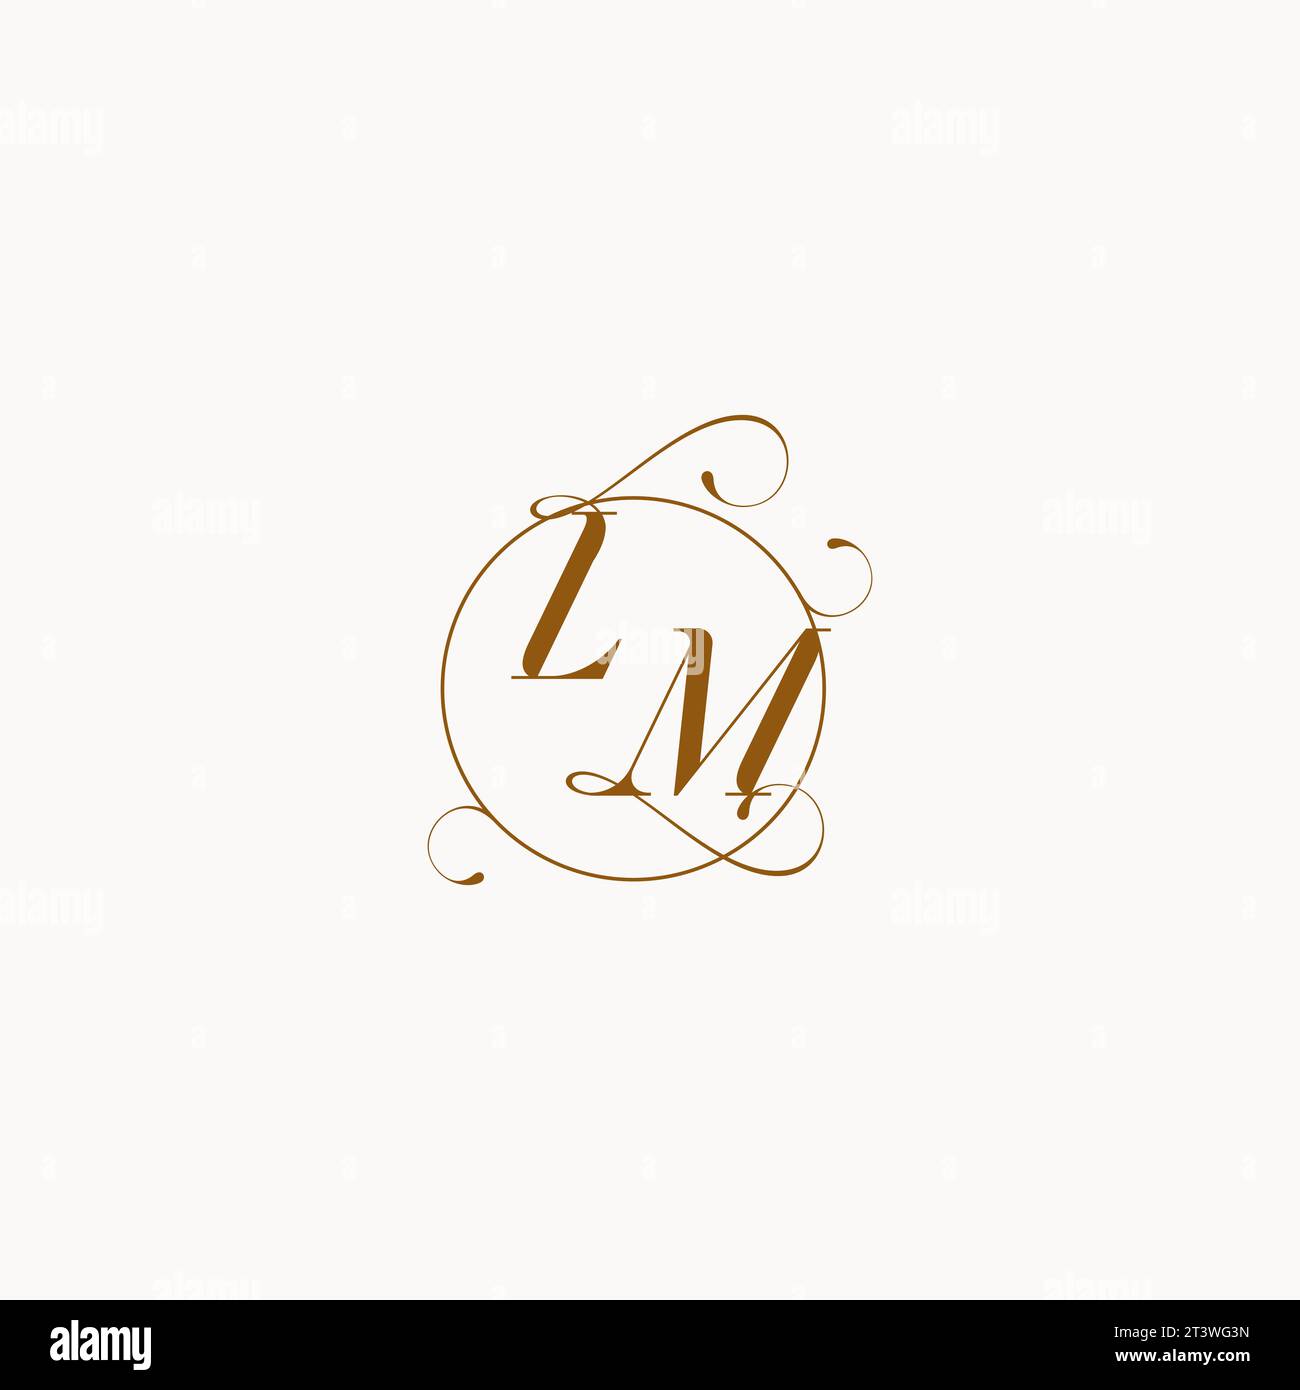 LM uniquely wedding logo symbol of your marriage and you can use it on your wedding stationary Stock Vector